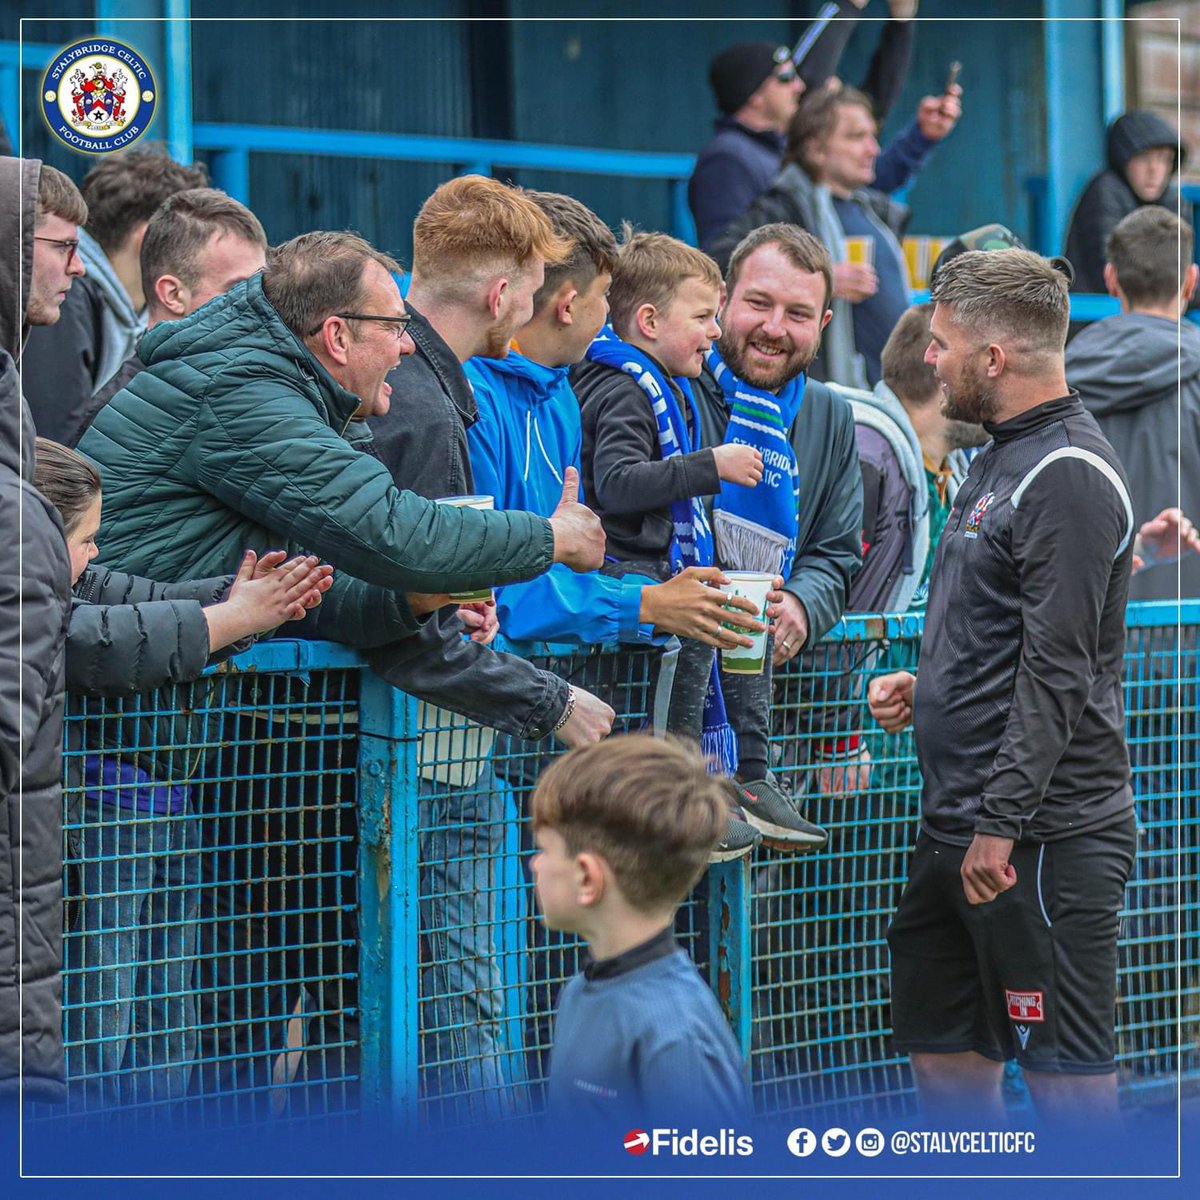 We're excited to announce season tickets for 2024/25 are now on sale! Buy via our new ticketing platform powered by @Justtikit and enjoy our '5-3-2-U' season tickets 🎟️ Flexi-tickets are coming soon 🔜 ➡️ stalycelticfc.link/seasontickets